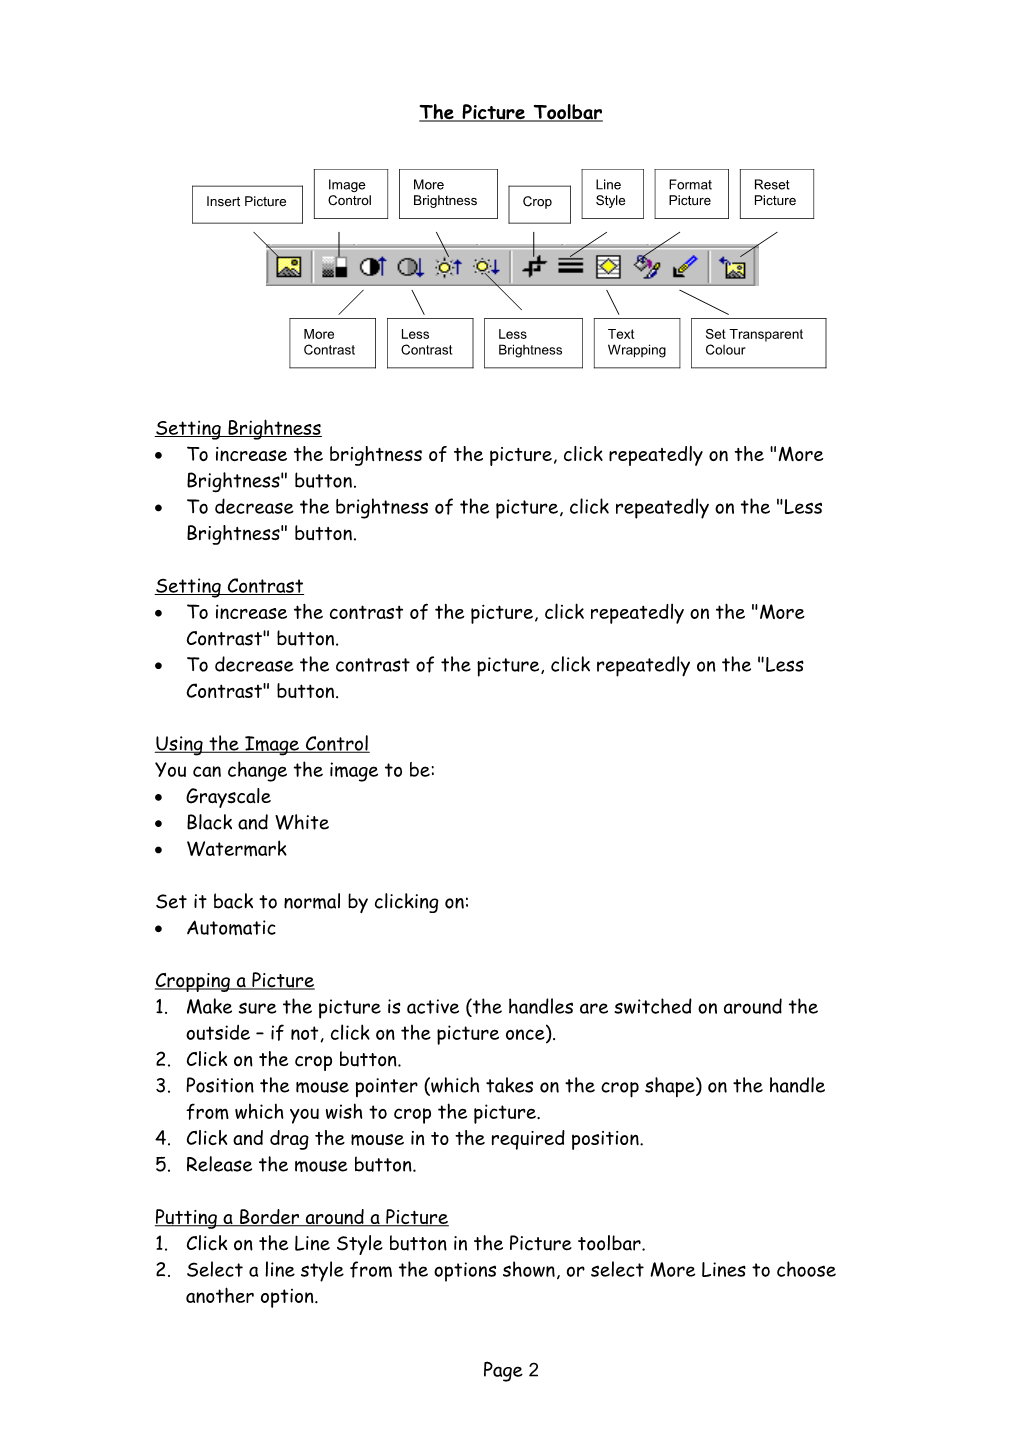 Manipulating Pictures in a Word Document